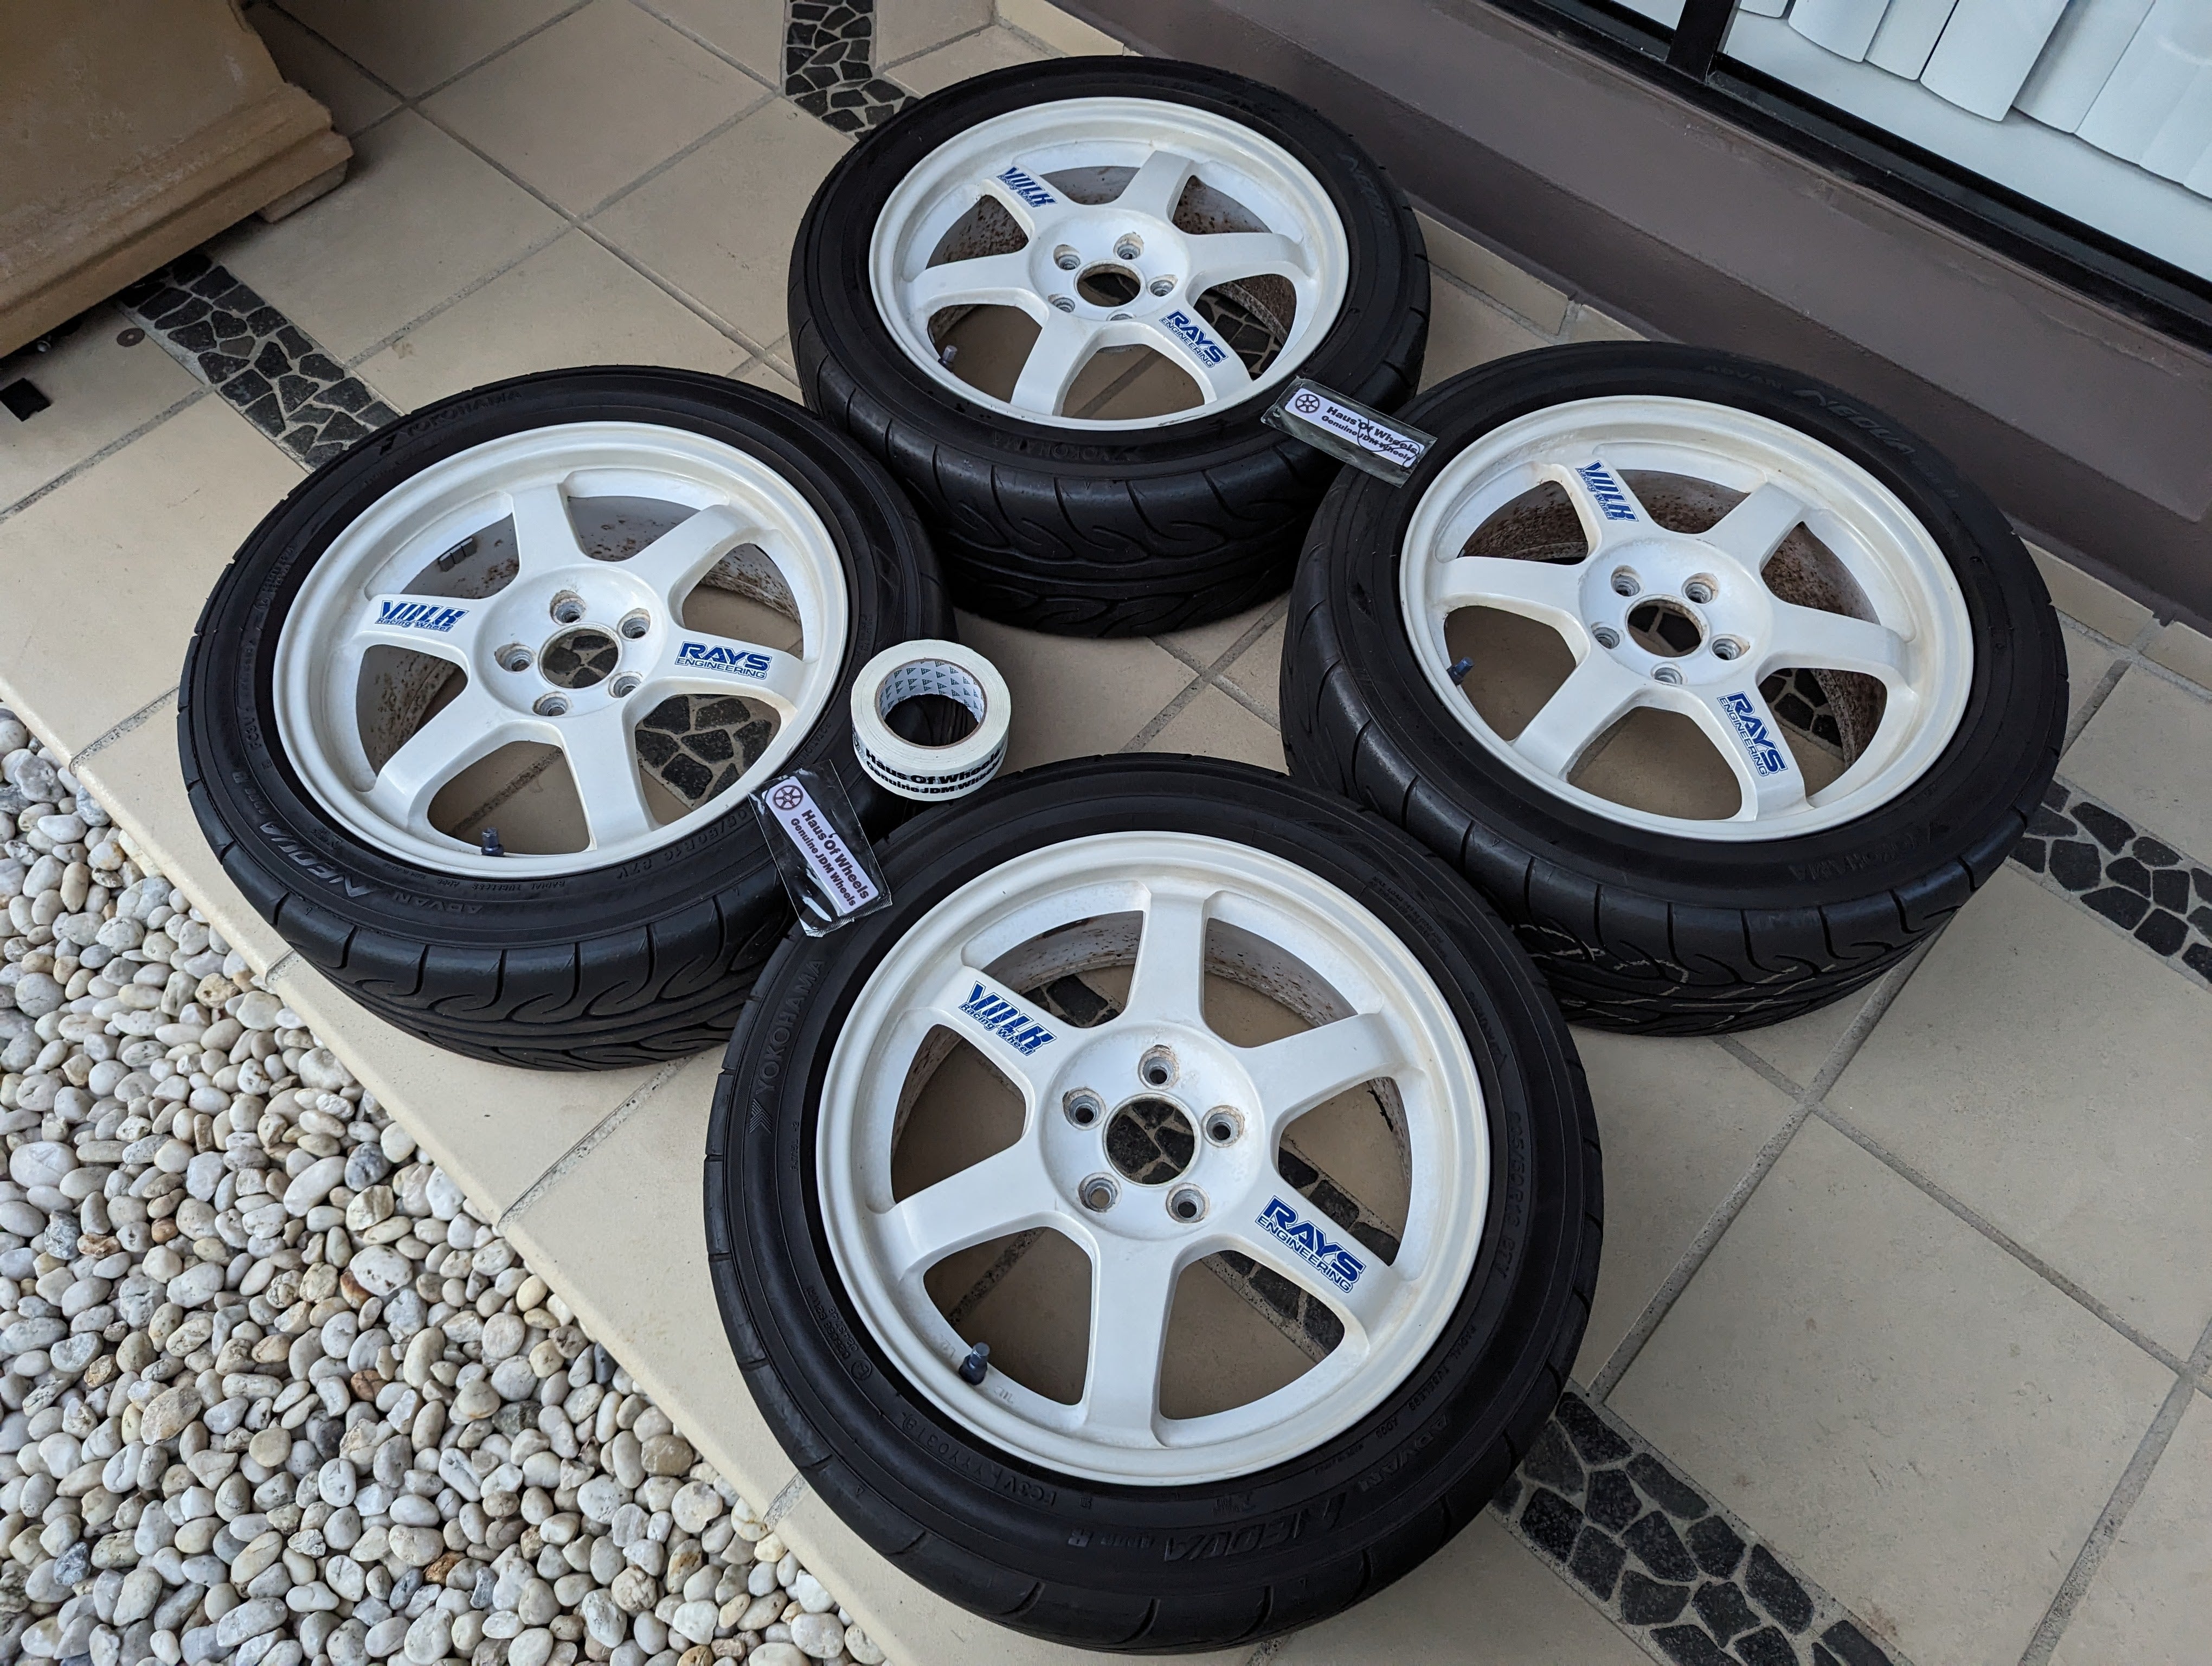 Rays TE37 OG (White) with Genuine Rays Stickers and AD08R Tyres